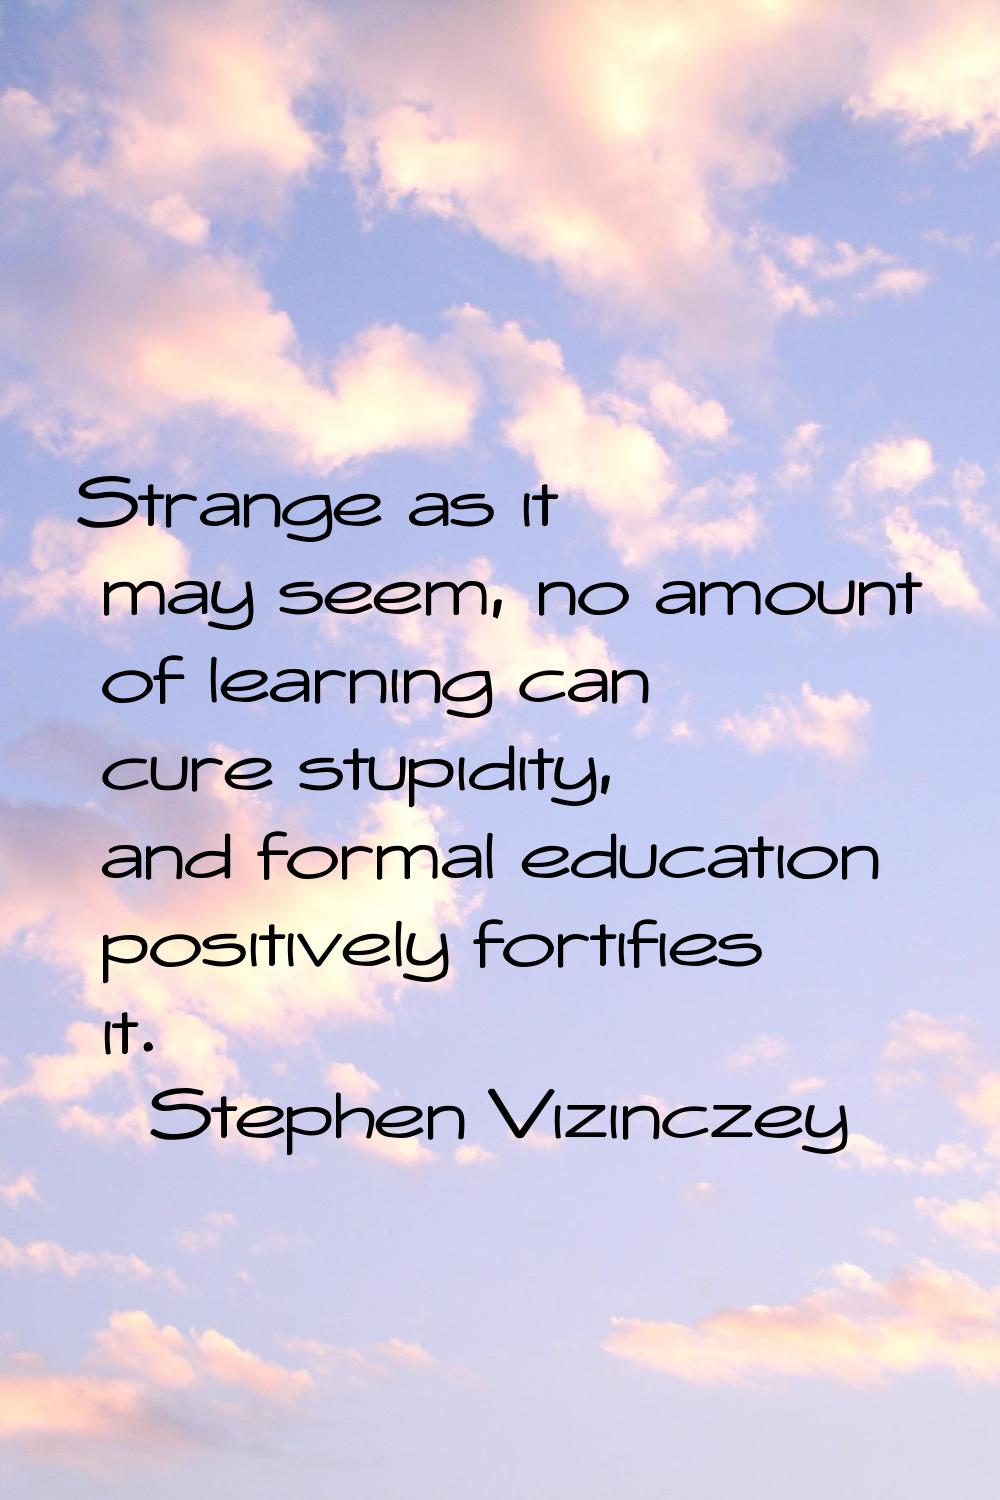 Strange as it may seem, no amount of learning can cure stupidity, and formal education positively f